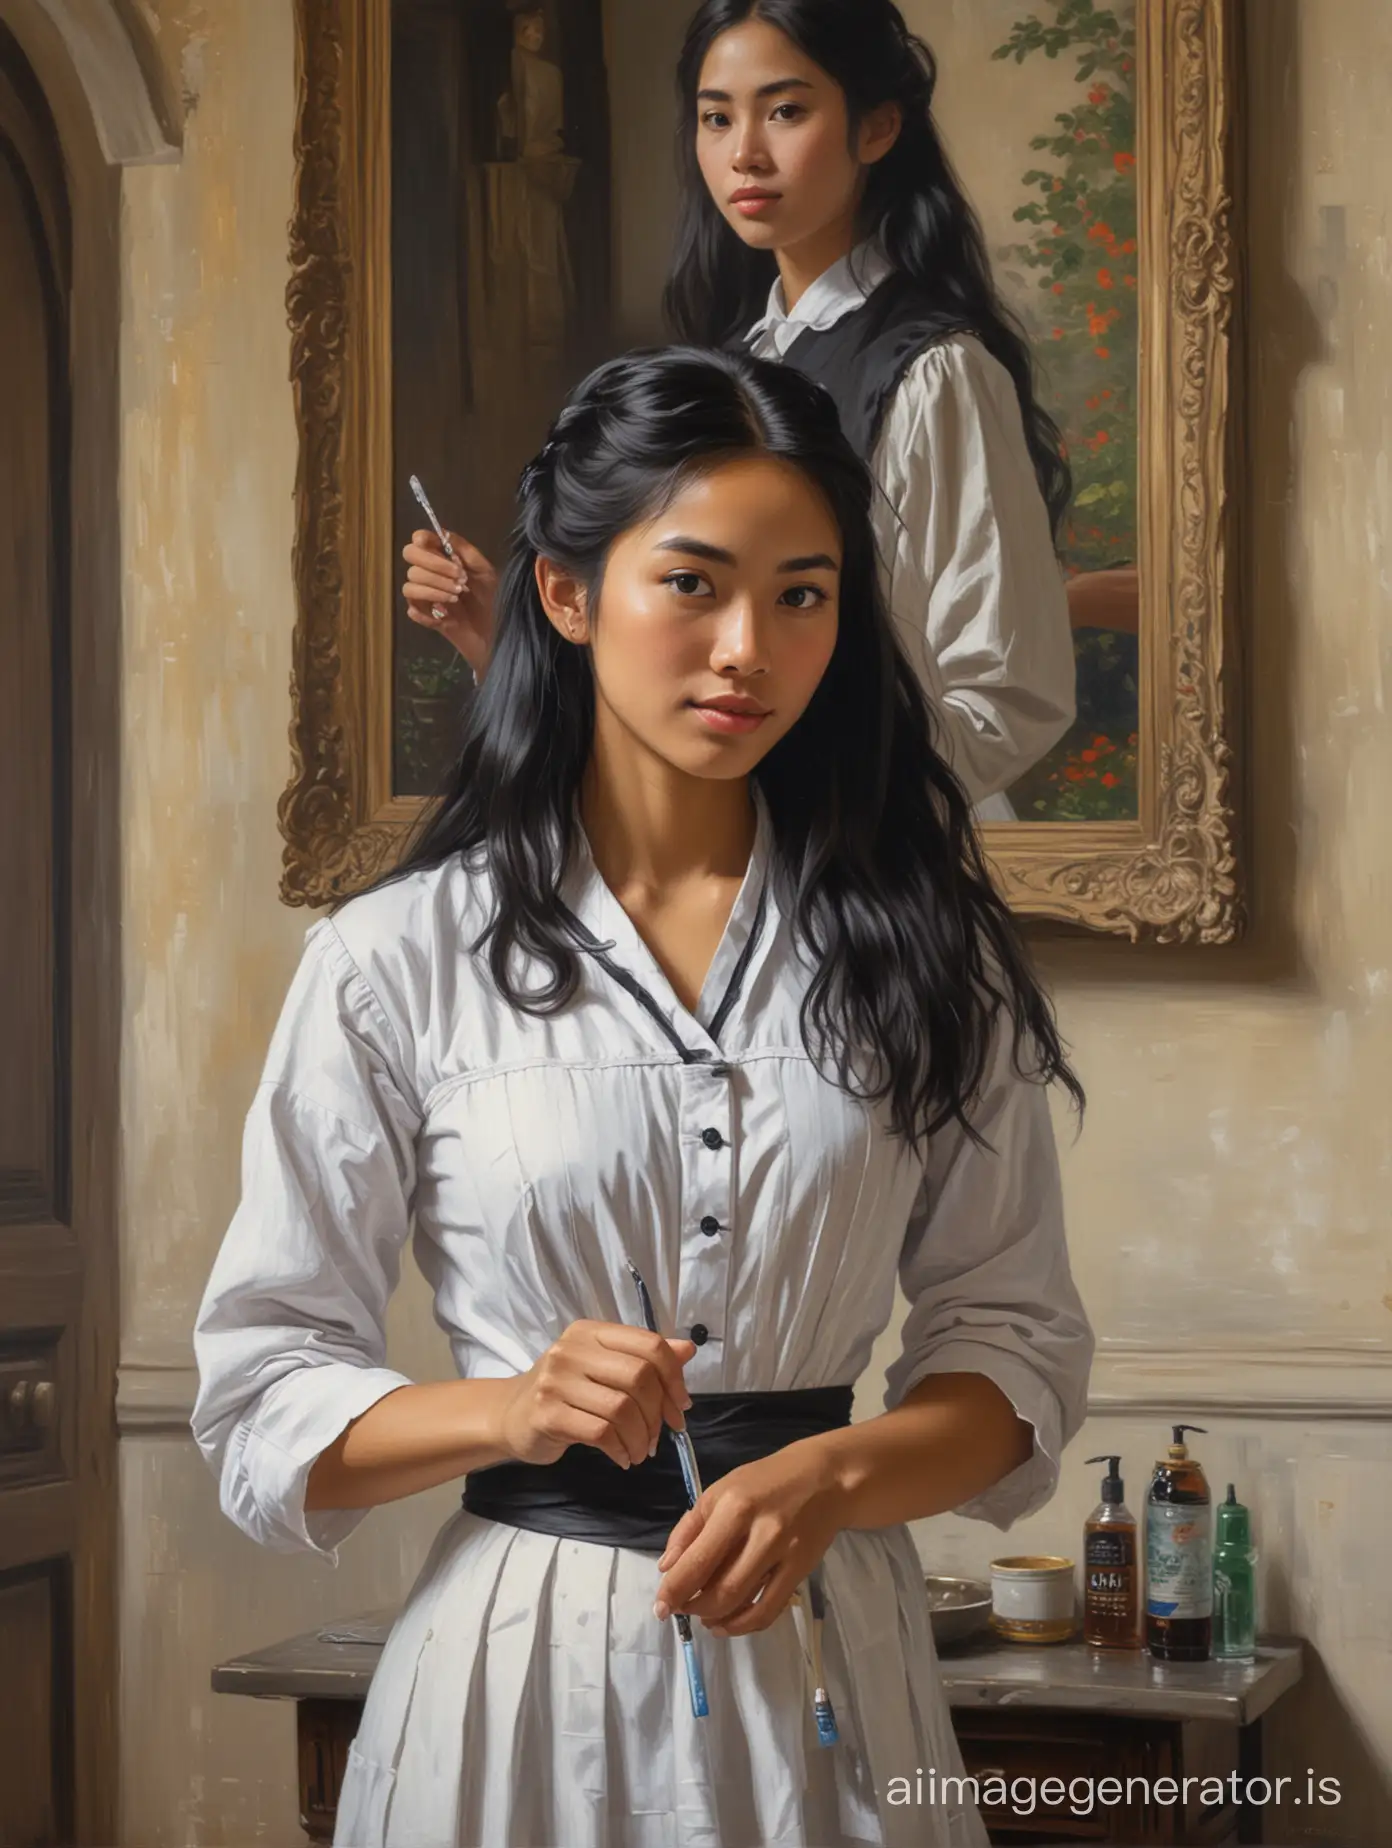 Monet frint view oil painting of a beautiful tanned Vietnamese maid with long black hair wearing a maid uniform holding a toothbrush, in a castle bathroom